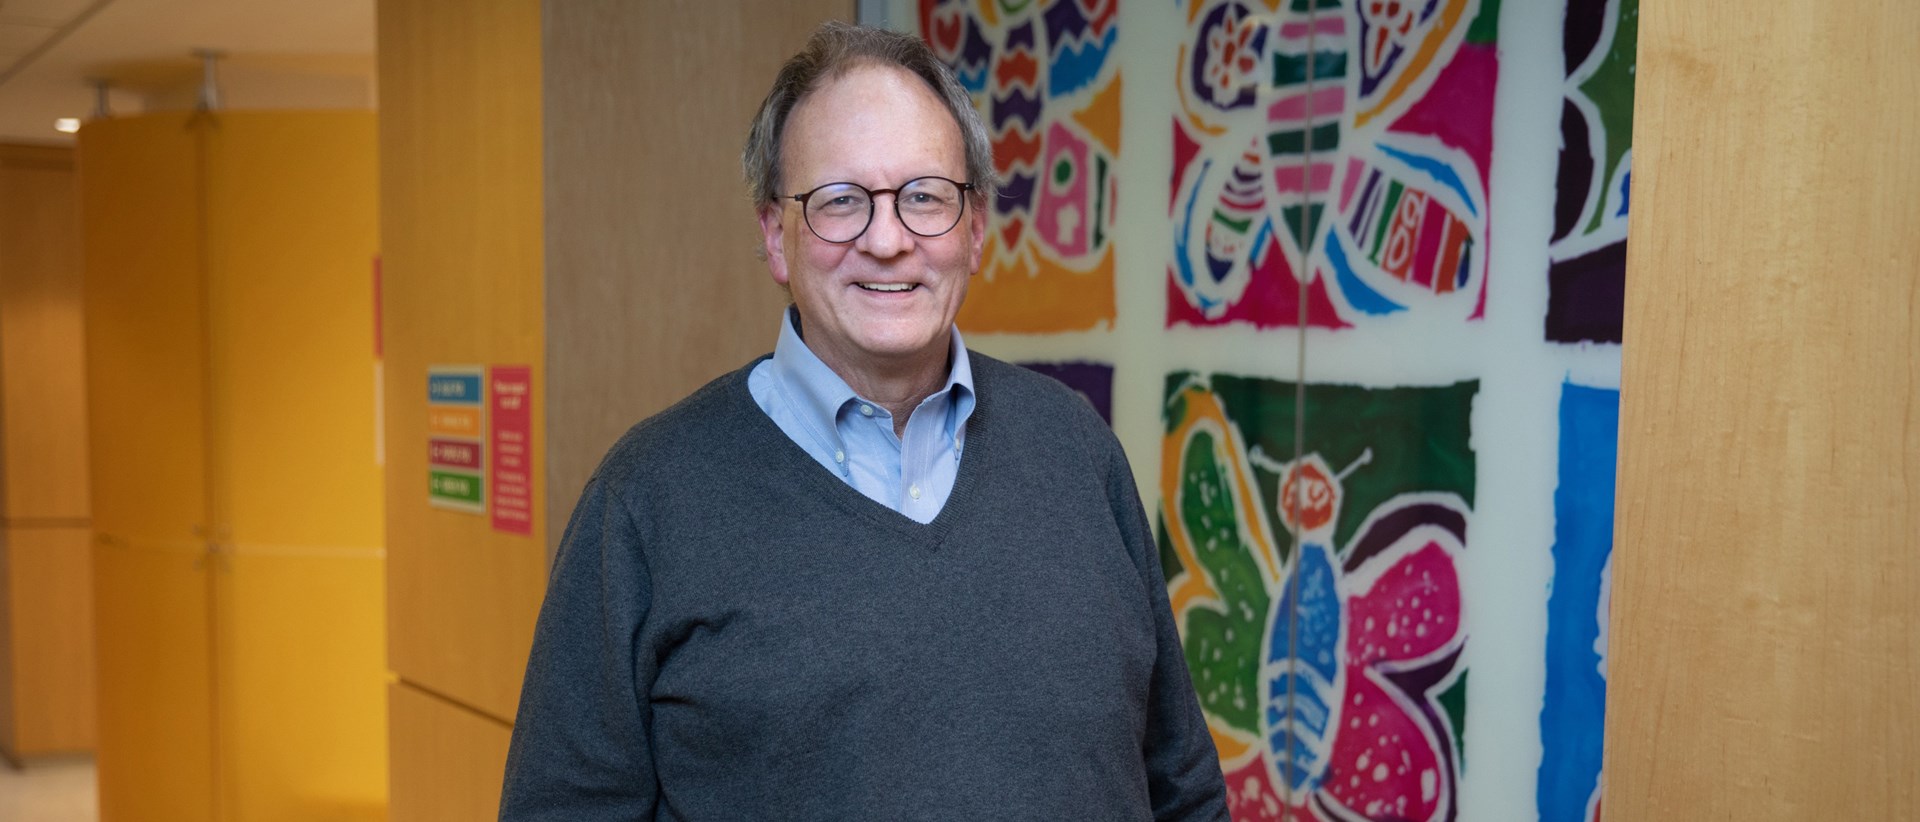 Jim Whitlock smiling and standing in a hallway in front of a wall with colourful butterfly paintings by children.